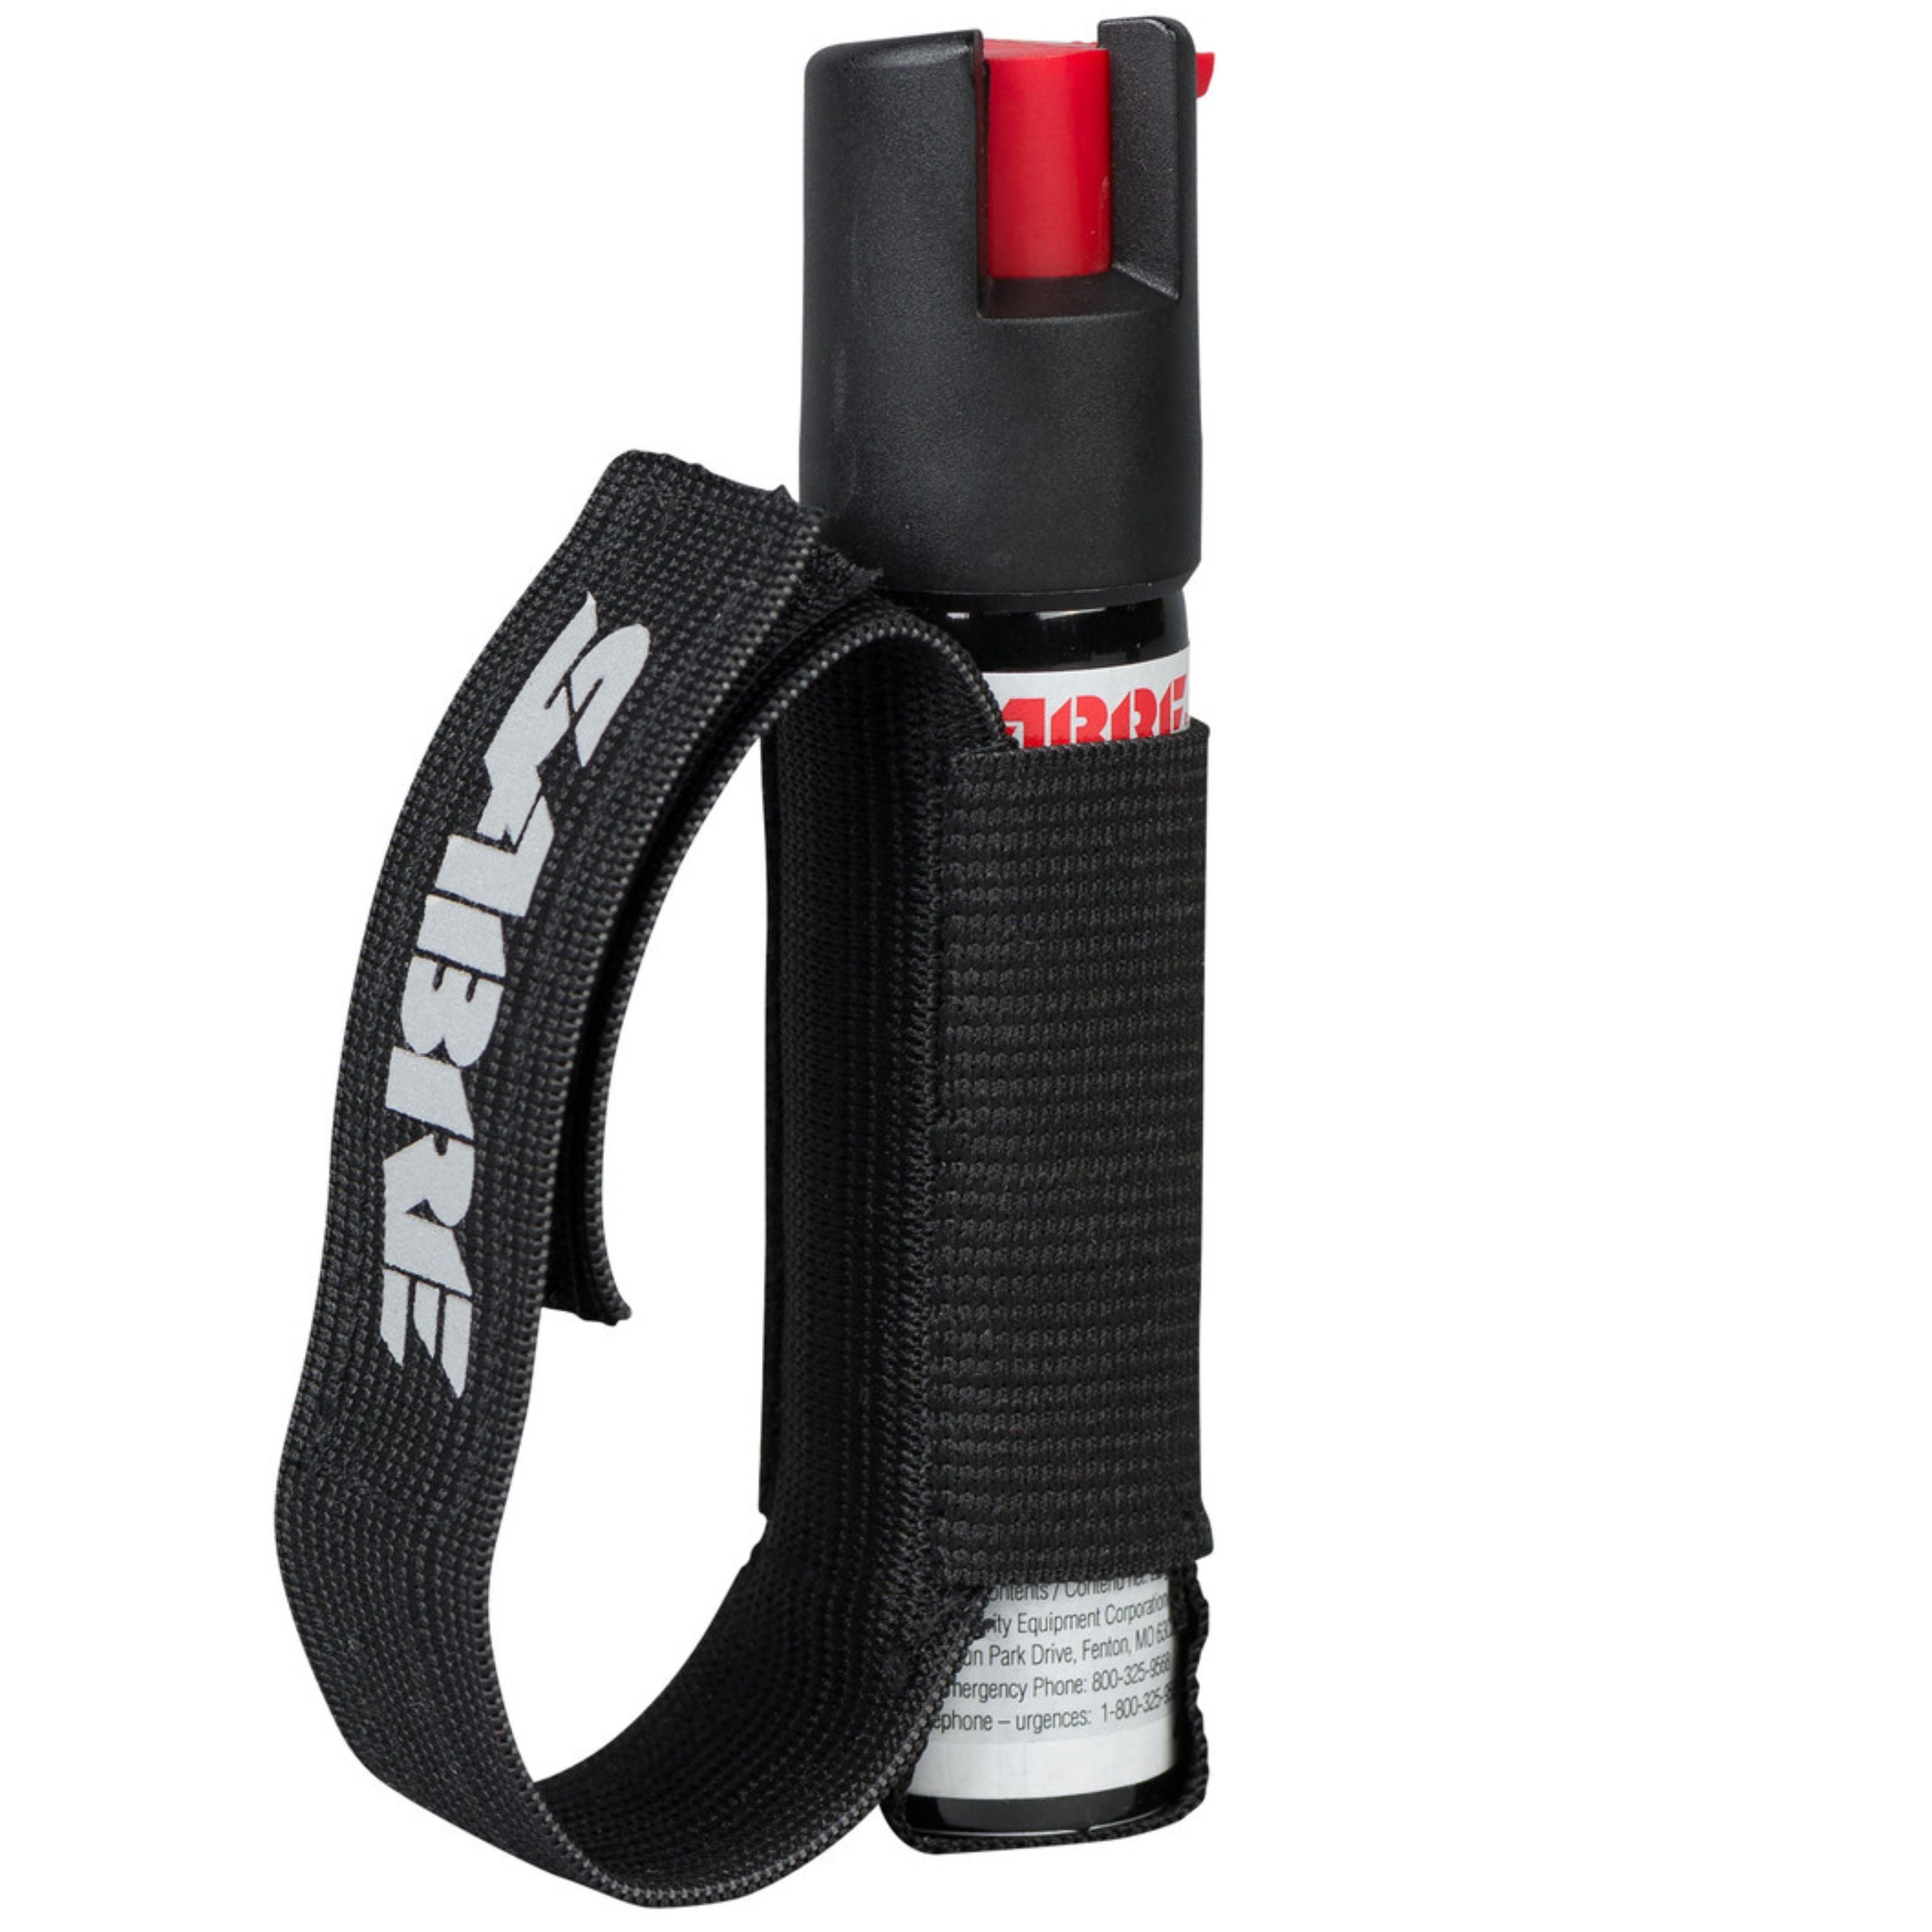 Deterrent pepper for dog attacks with hand strap